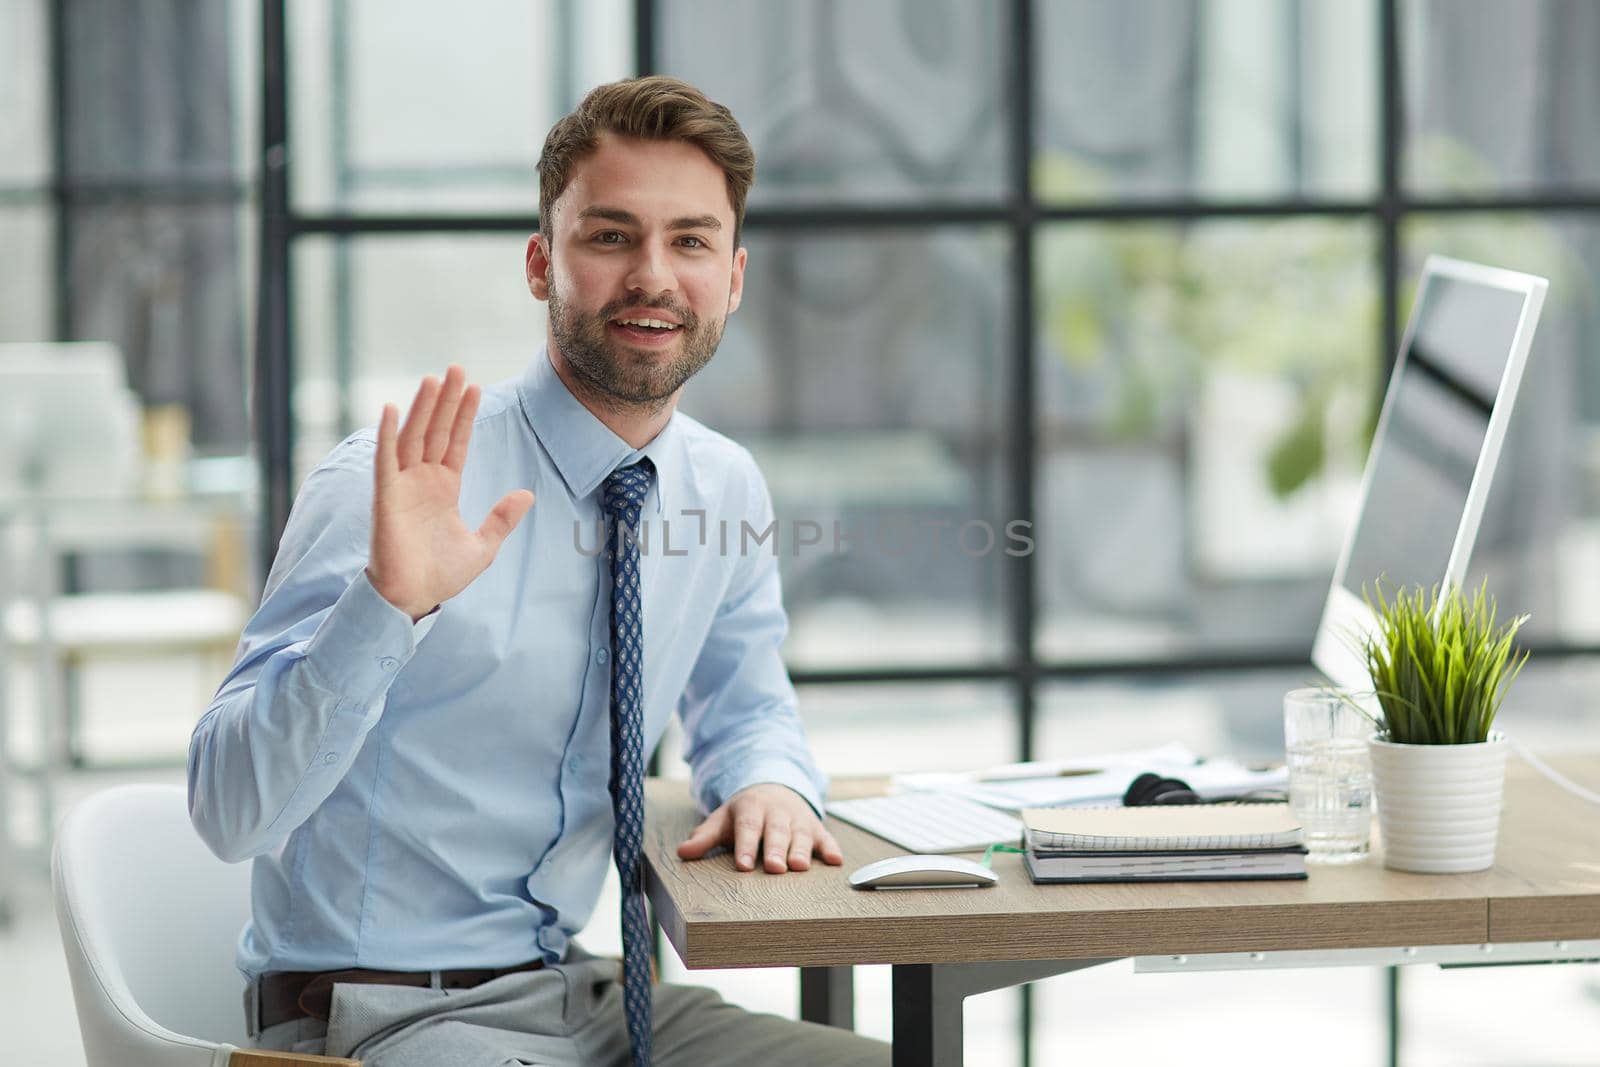 Hello. Portrait Of Cheerful Middle Aged Business Man Waving Hand Smiling